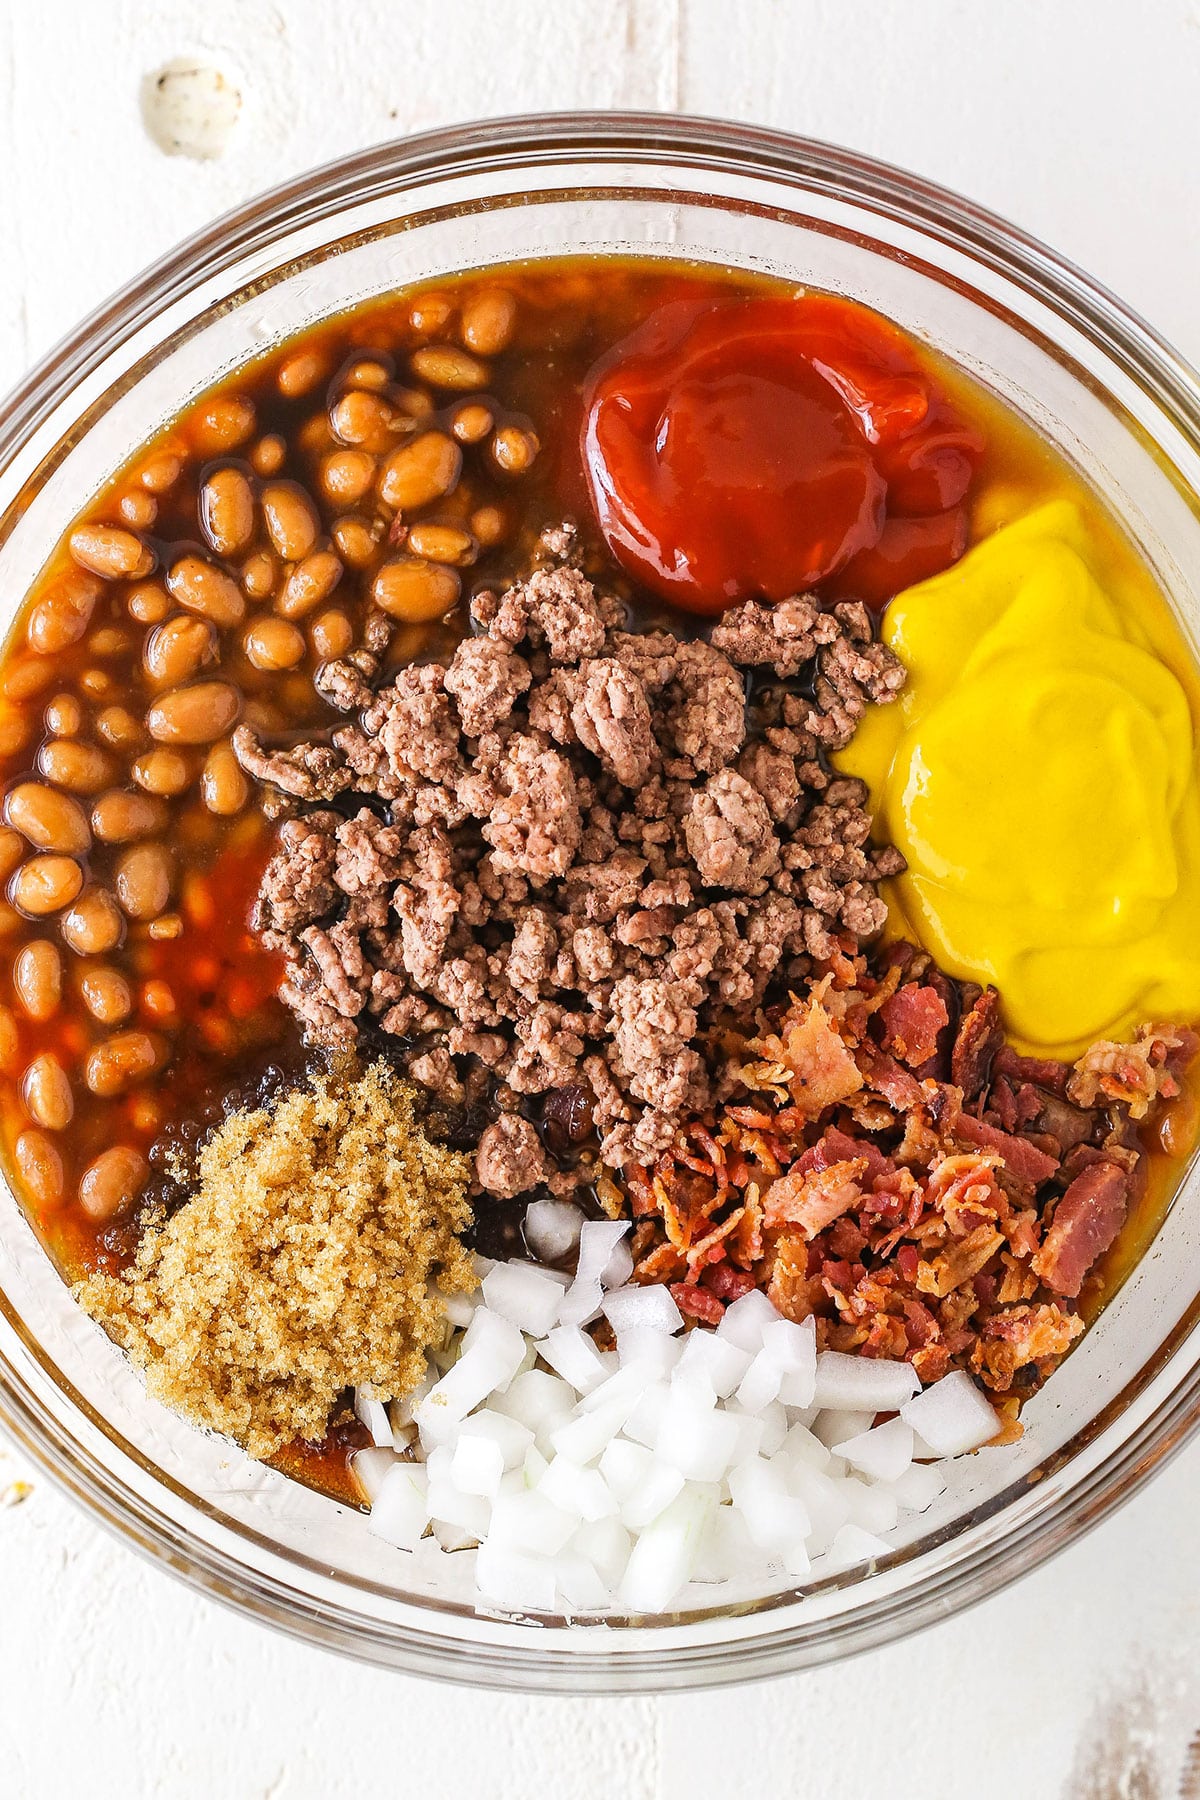 Overhead view of Mom's Amazing Baked Beans ingredients in a clear glass bowl